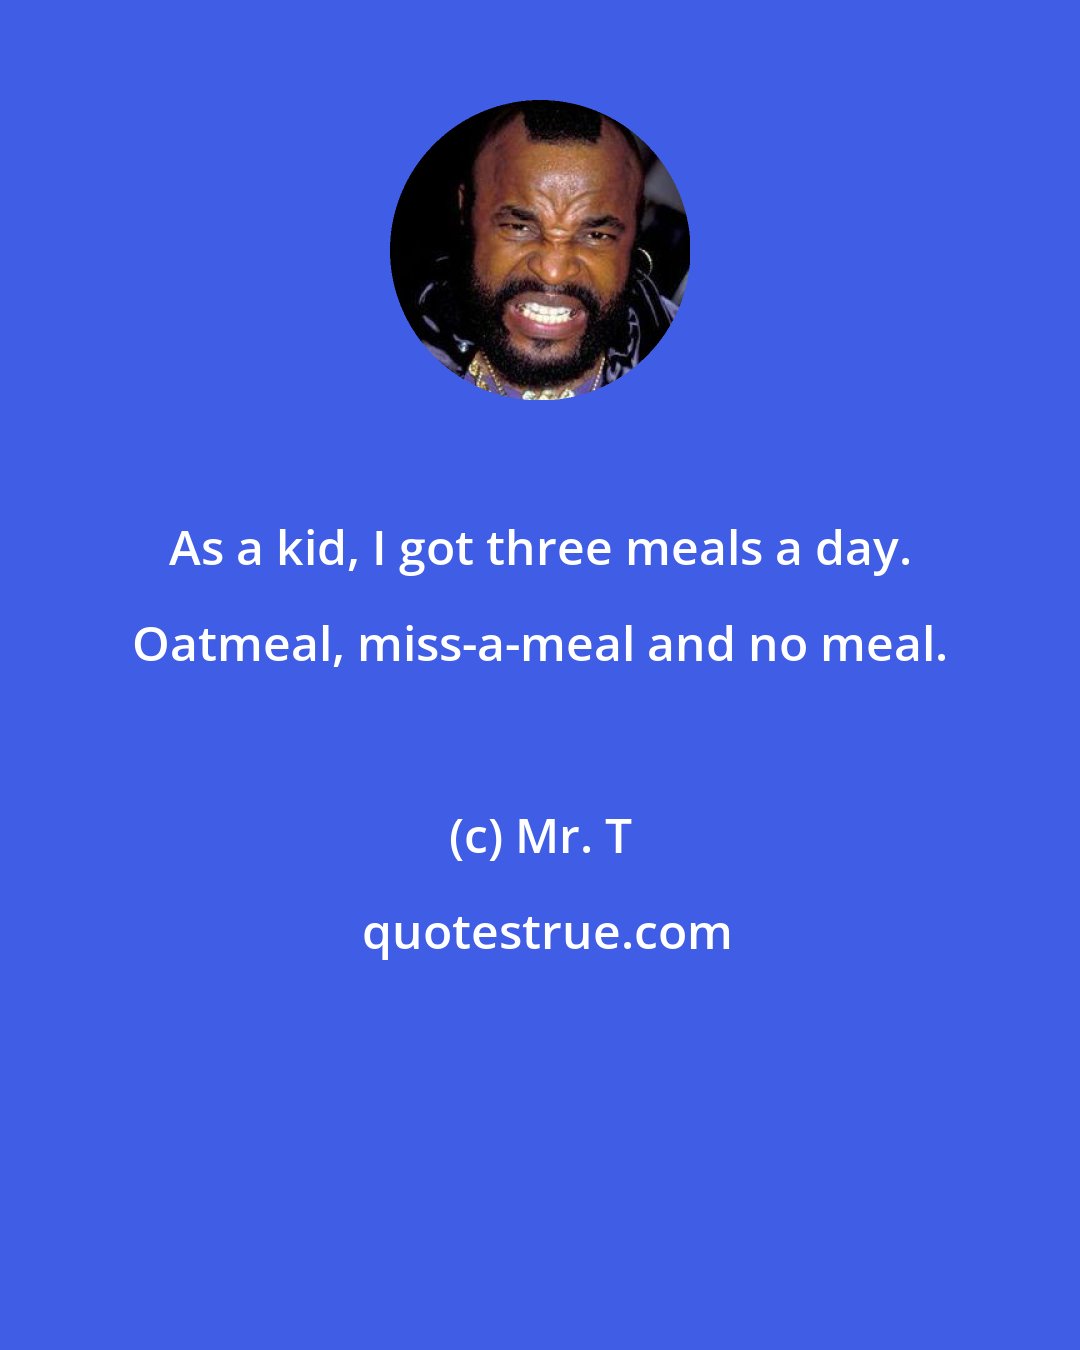 Mr. T: As a kid, I got three meals a day. Oatmeal, miss-a-meal and no meal.